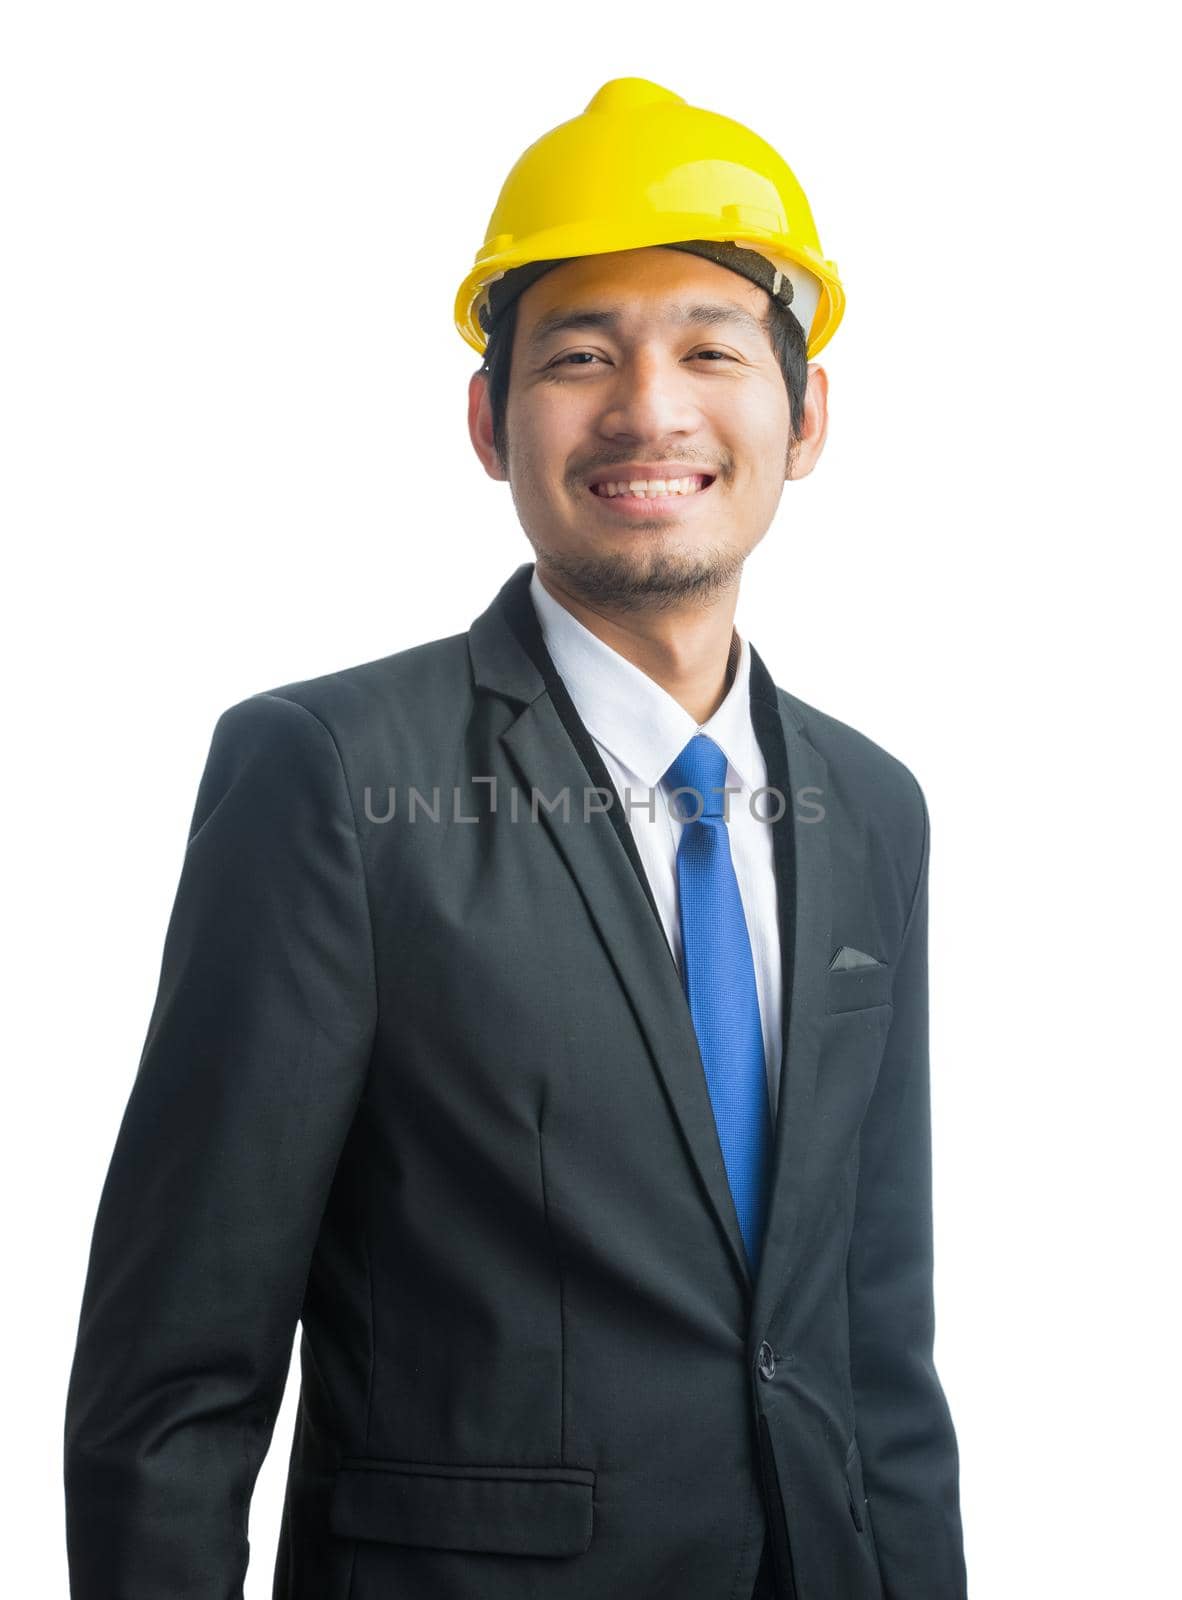 Businessman with construction helmet Isolated on over white background